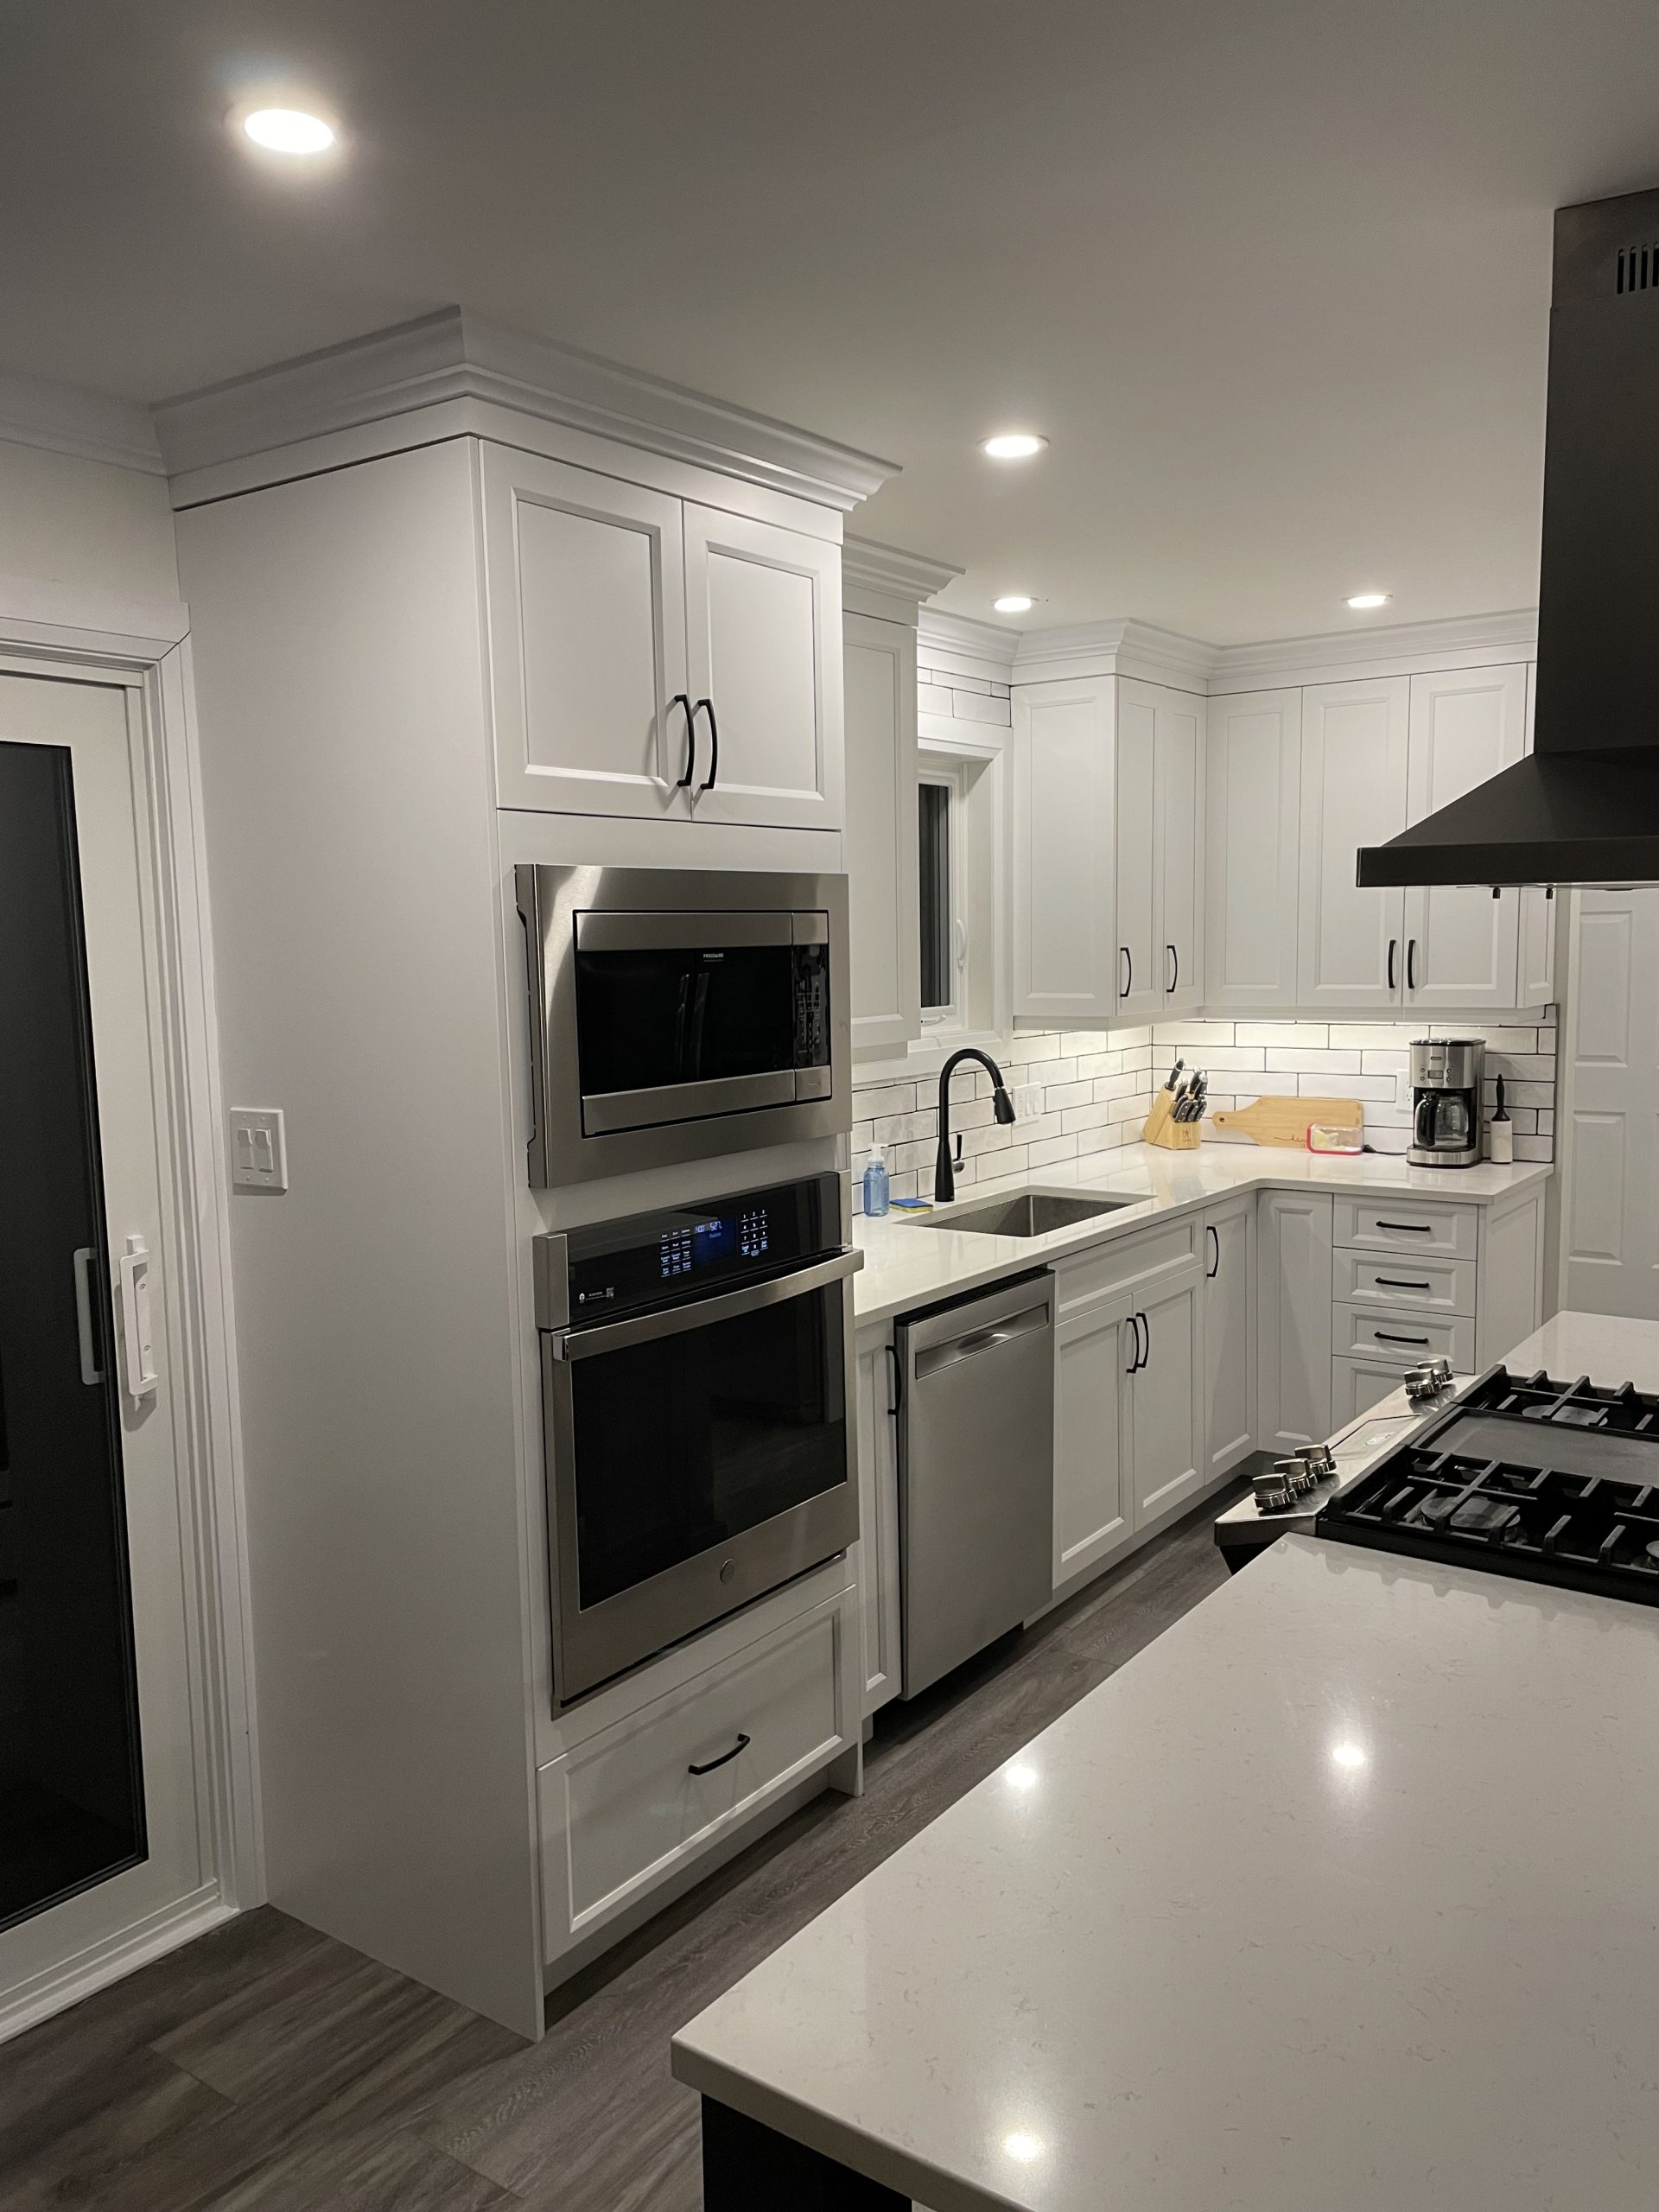 Wall oven and prep area after full kitchen renovation with custom cabinetry by SSP Cabinetry